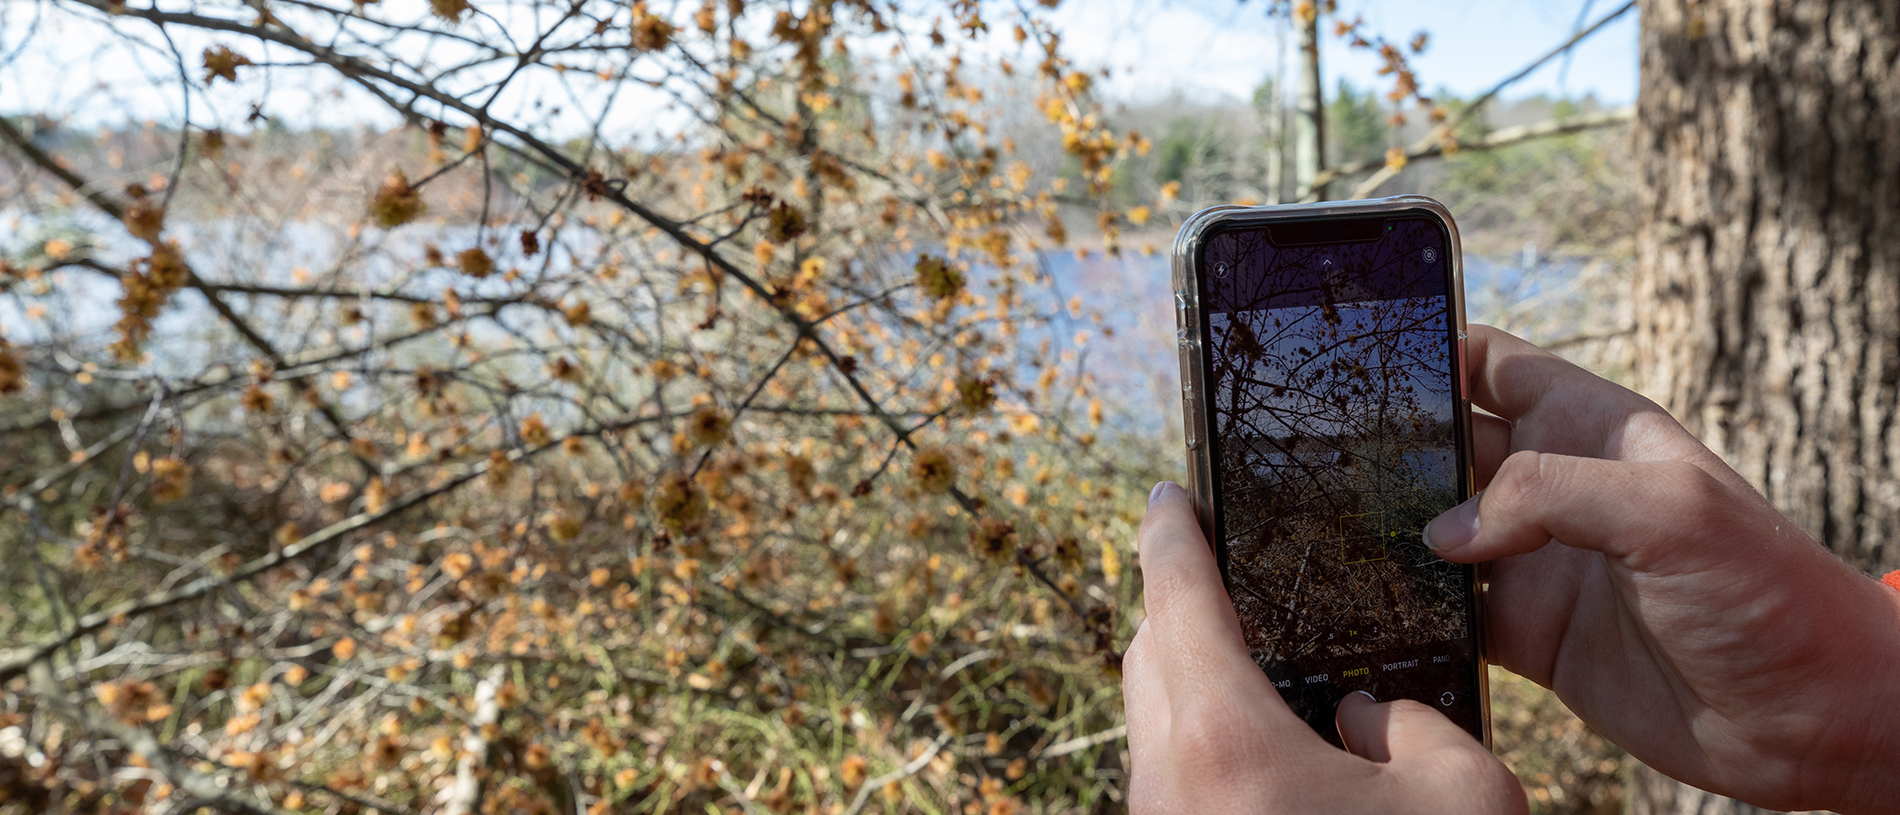 Person taking a photo of branches with a smartphone